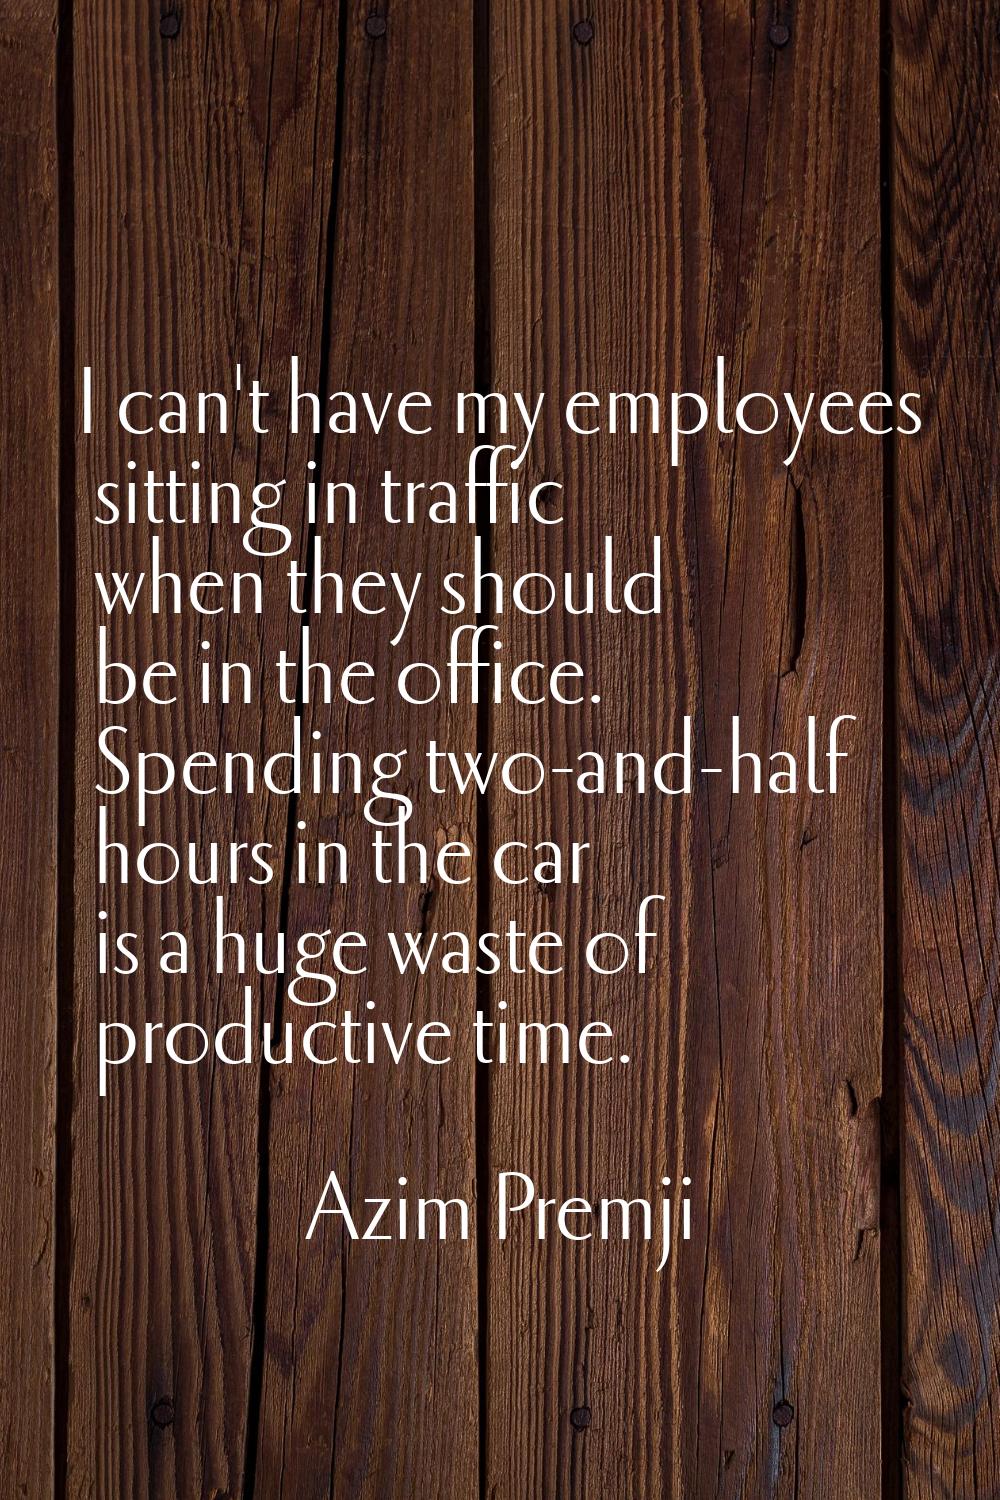 I can't have my employees sitting in traffic when they should be in the office. Spending two-and-ha